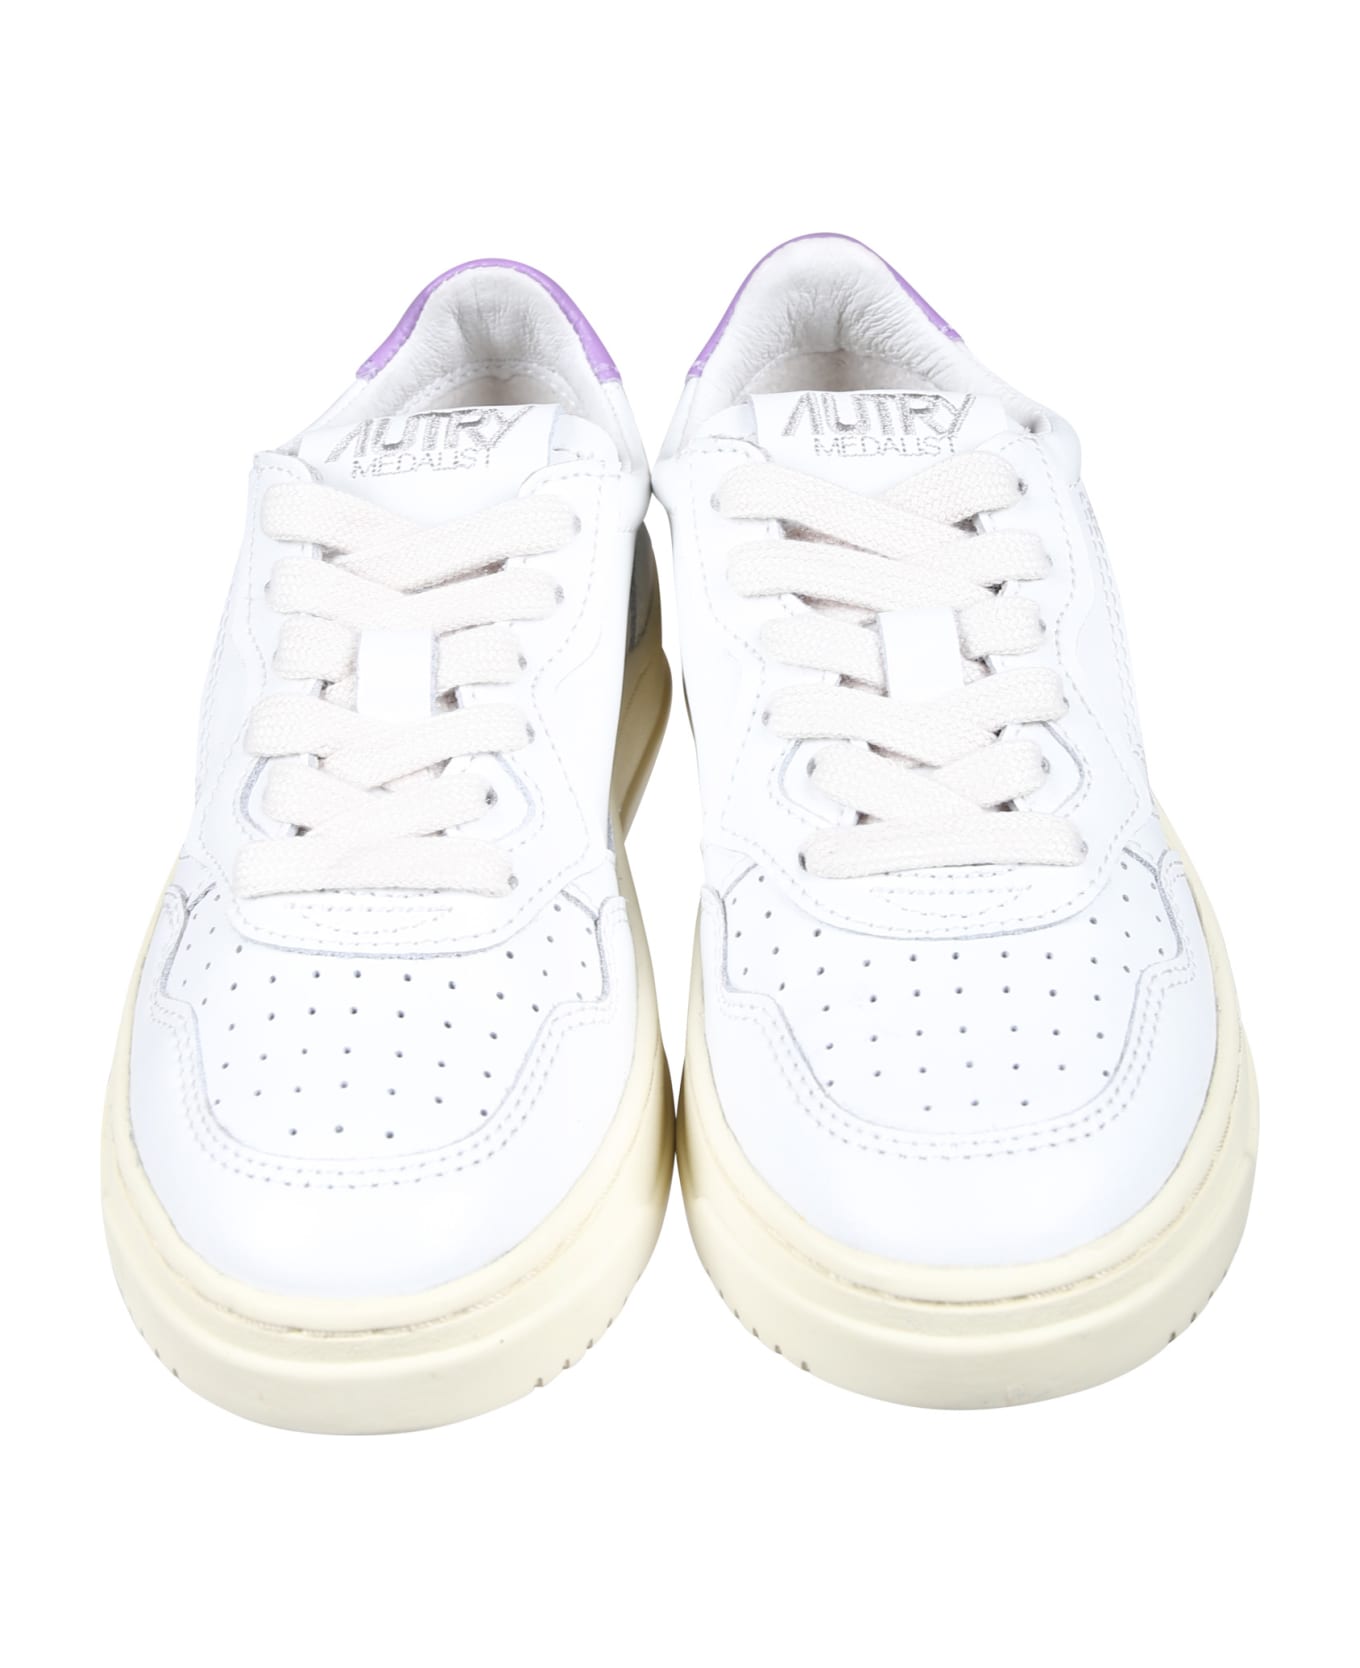 Autry Medalist Low Sneakers For Kids - Bianco